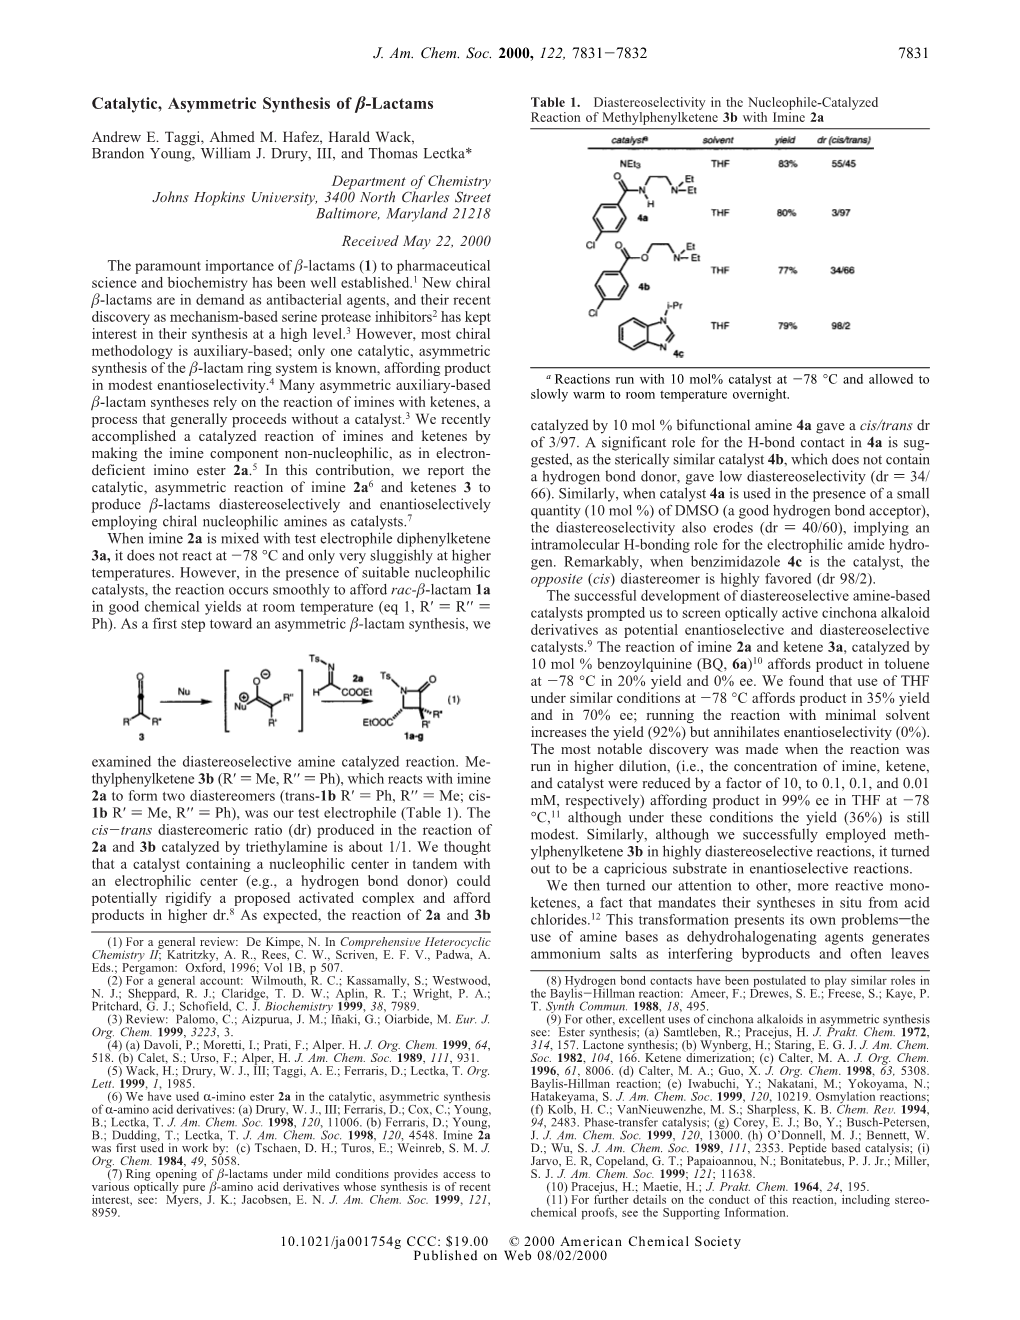 Catalytic, Asymmetric Synthesis of Β-Lactams